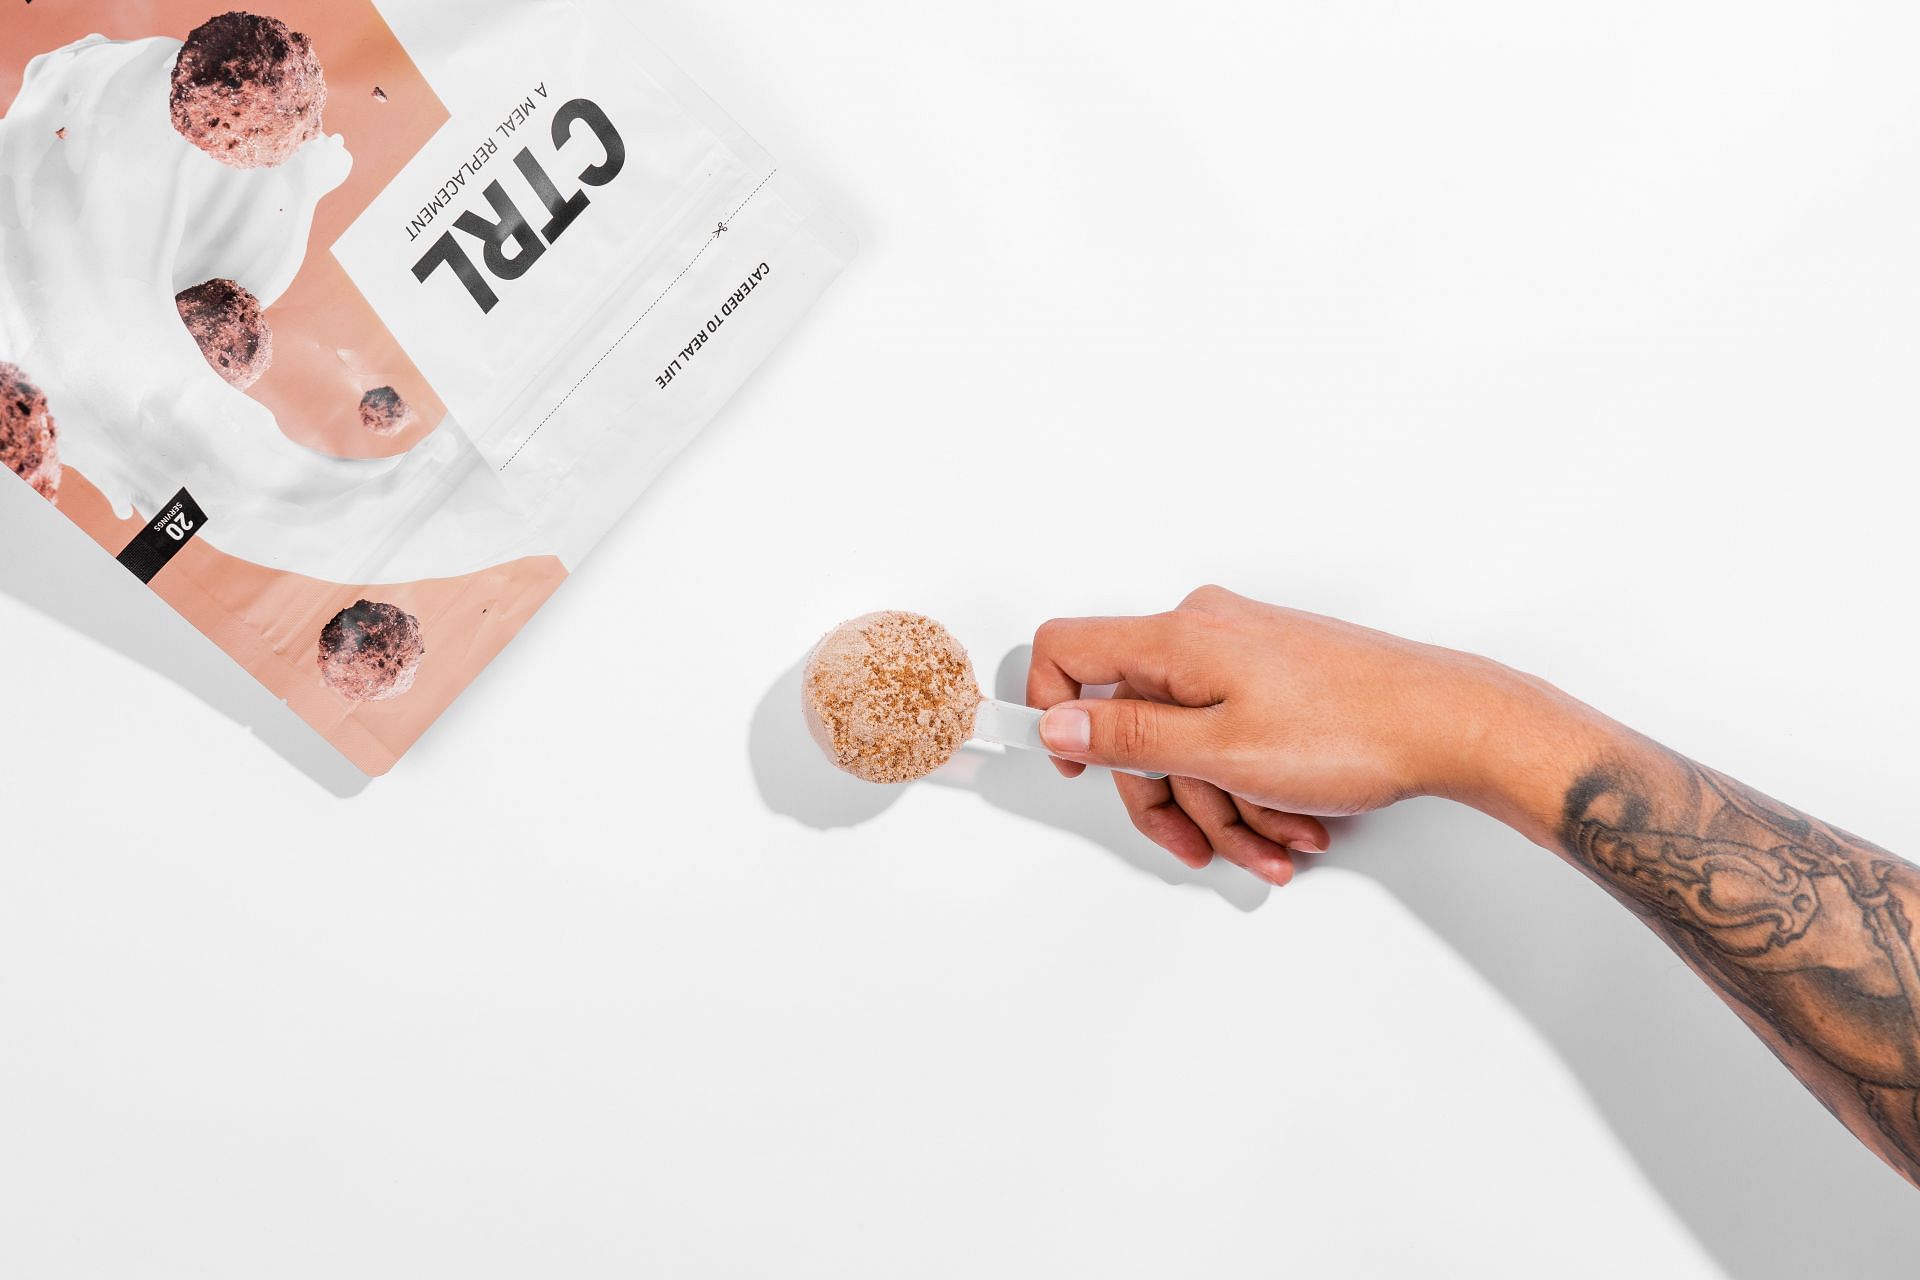 Finding a good protein powder that&#039;s also lactose free can be quite a task. (image via Unsplash/Ctrl A Meal Replacement)